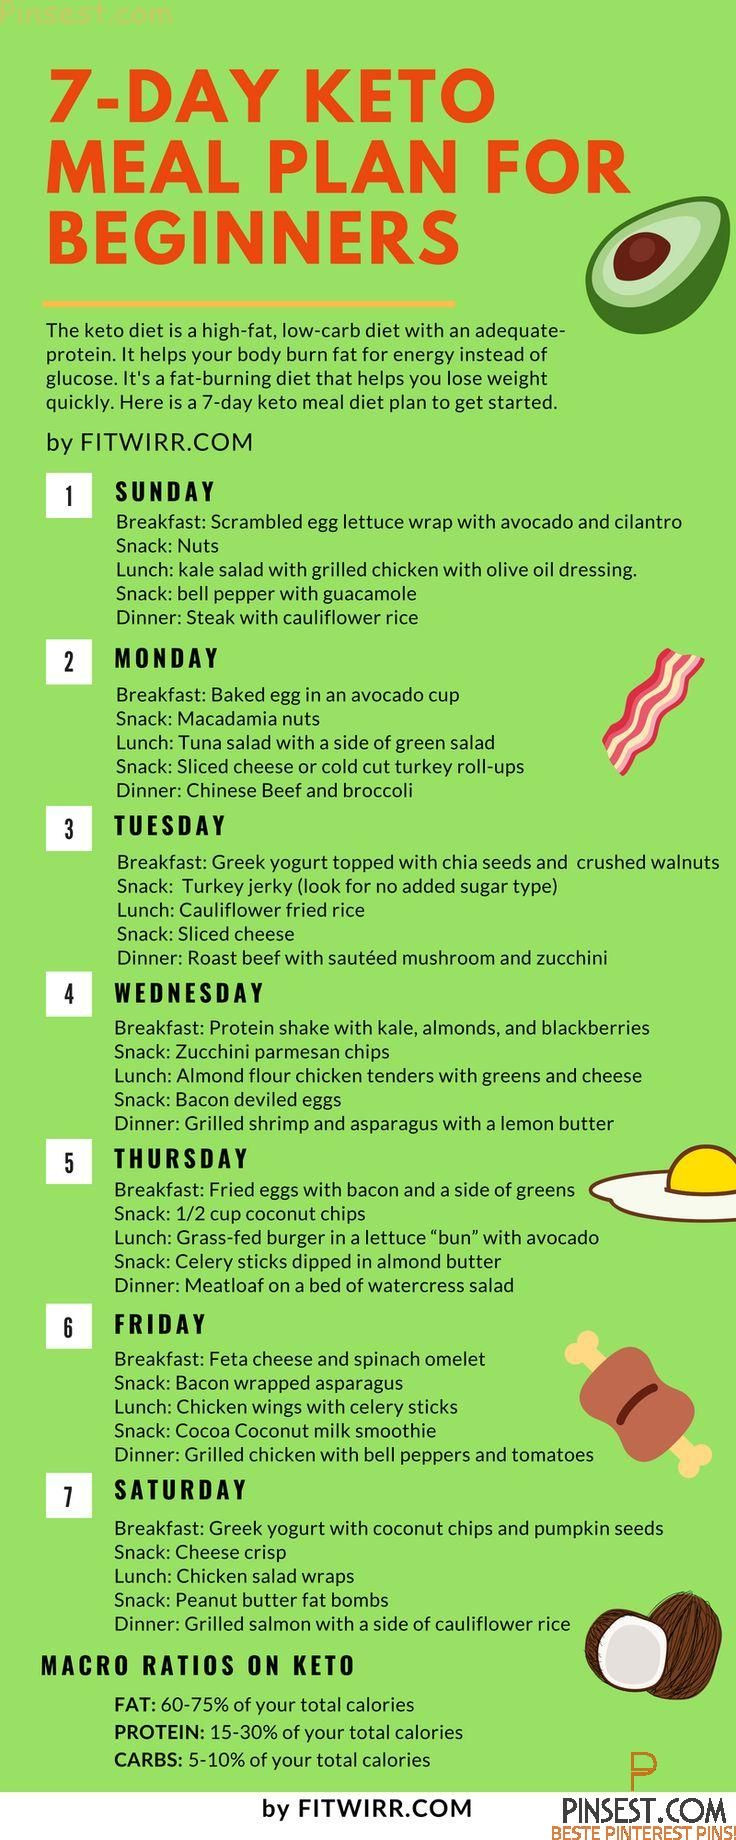 Keto Diet For Beginners Keto Diet For Beginners Meal Plan With Grocery List
 7 day keto meal plan for beginners keto t plan